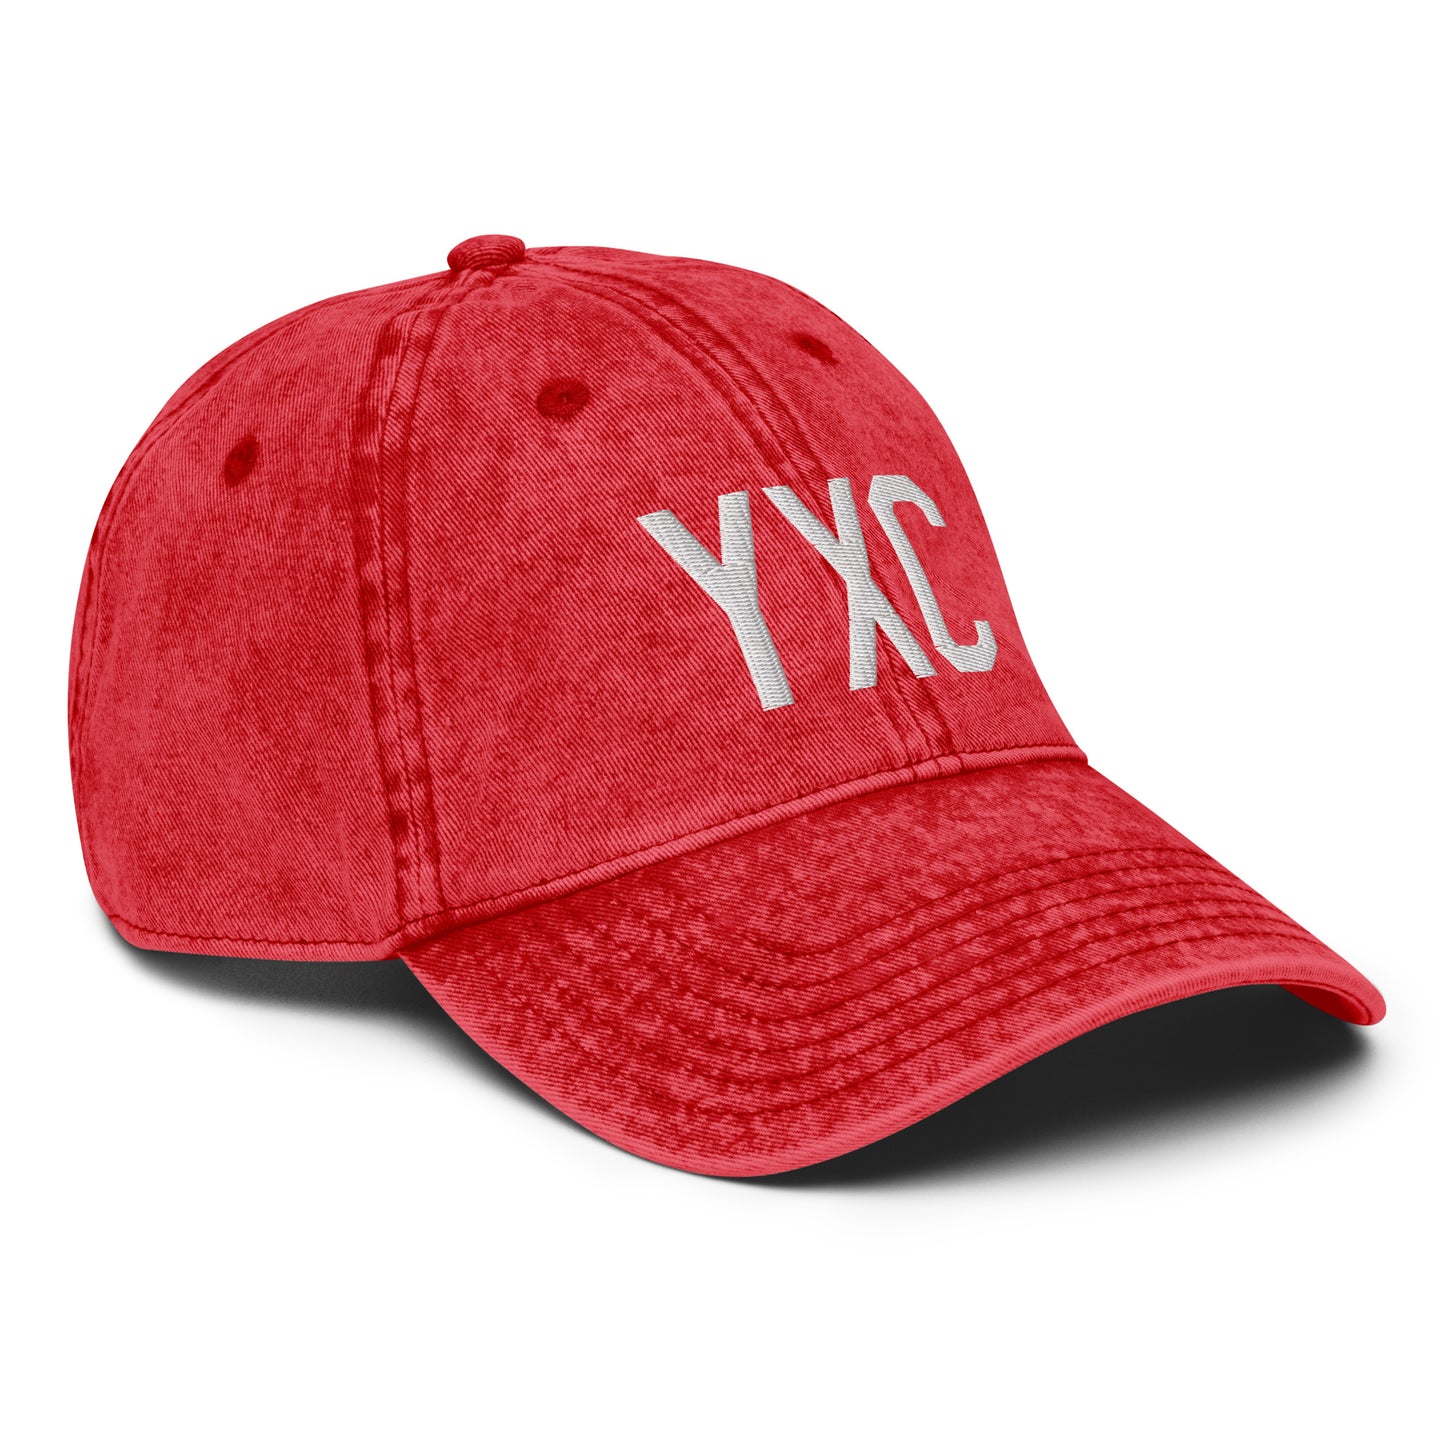 Airport Code Twill Cap - White • YXC Cranbrook • YHM Designs - Image 24